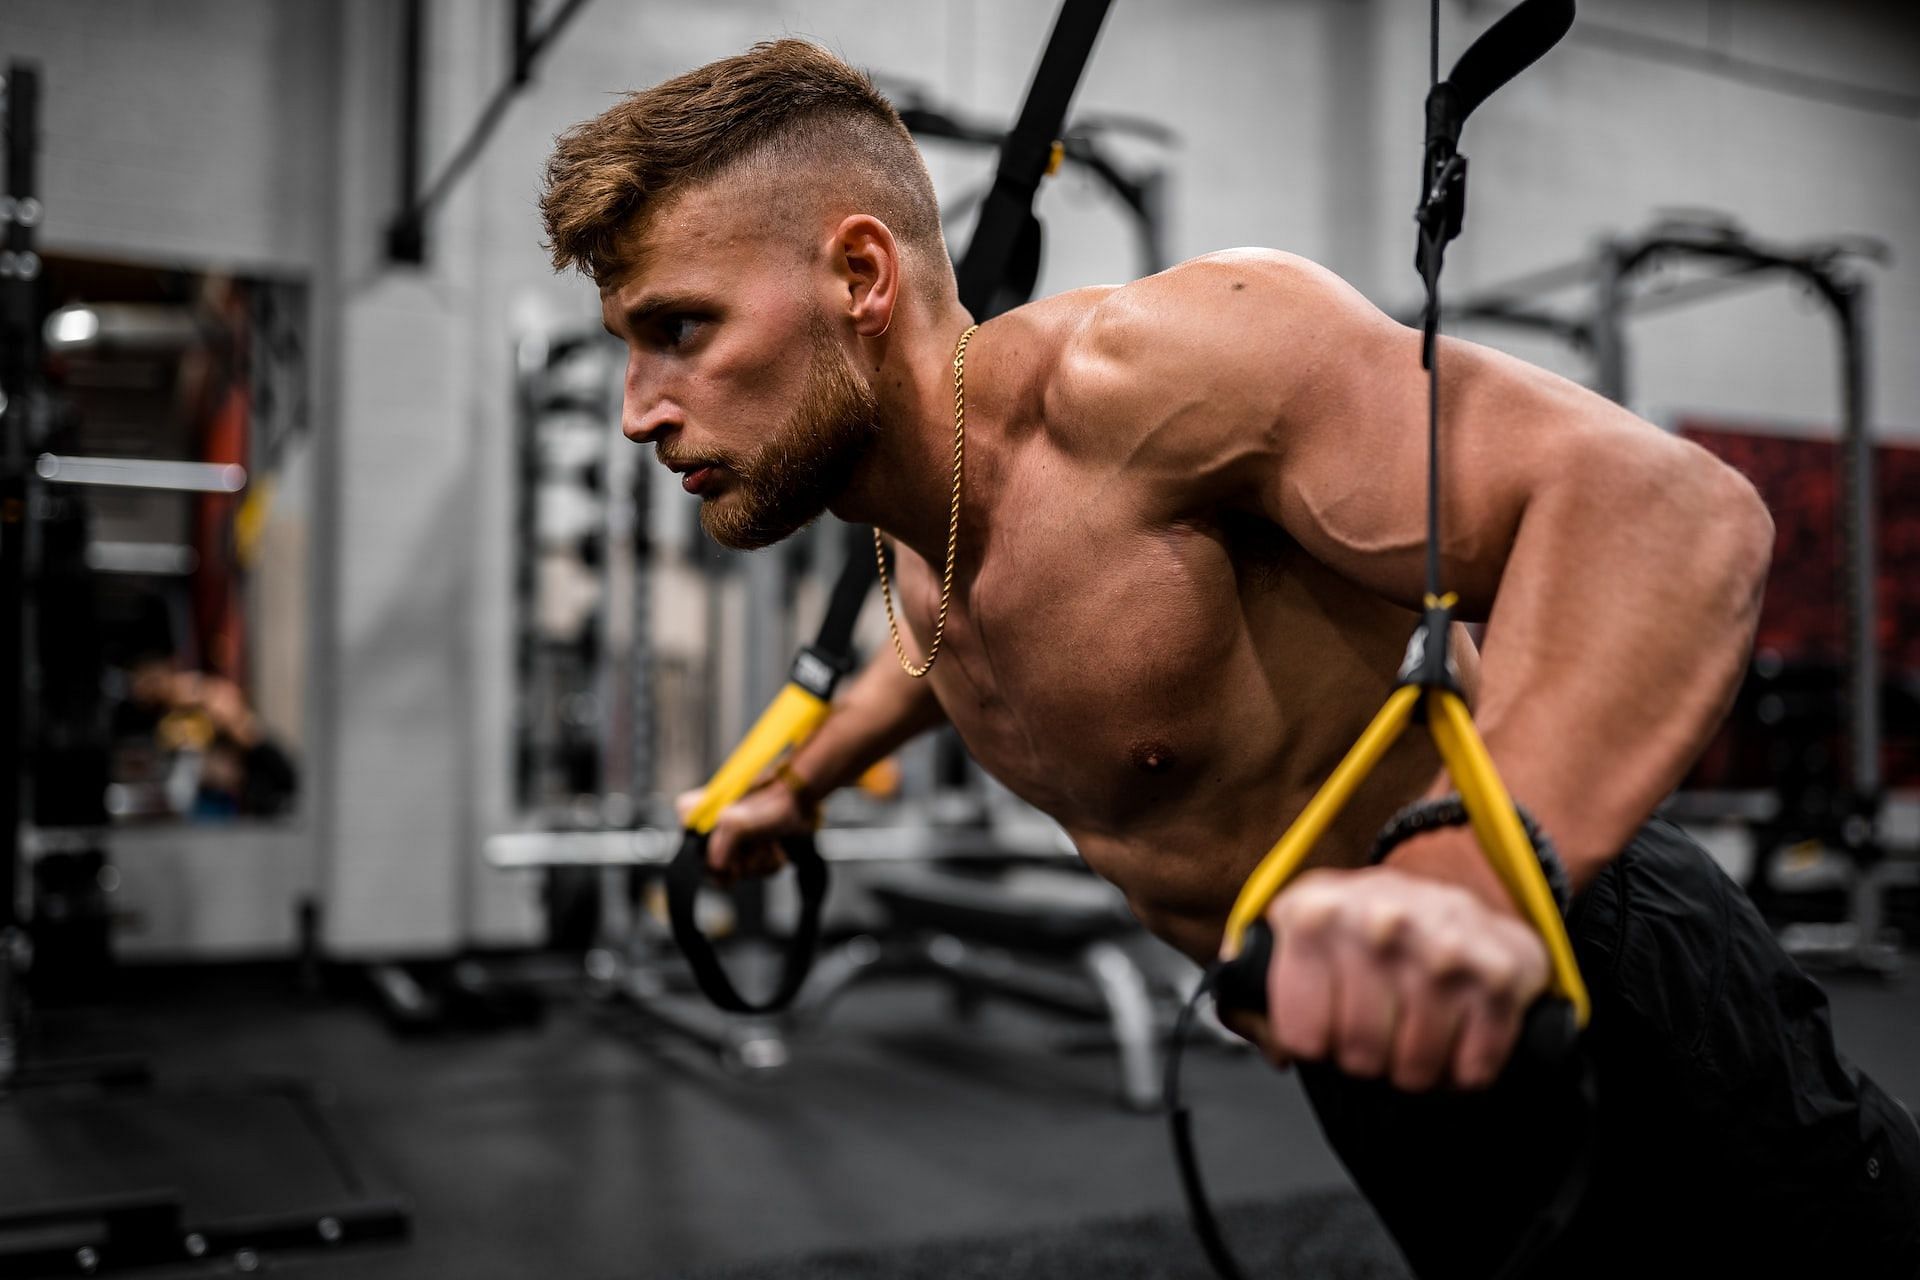 Creatine works when used alongside diet and workout routine. (Photo by Unsplash/Anastase Maragos)